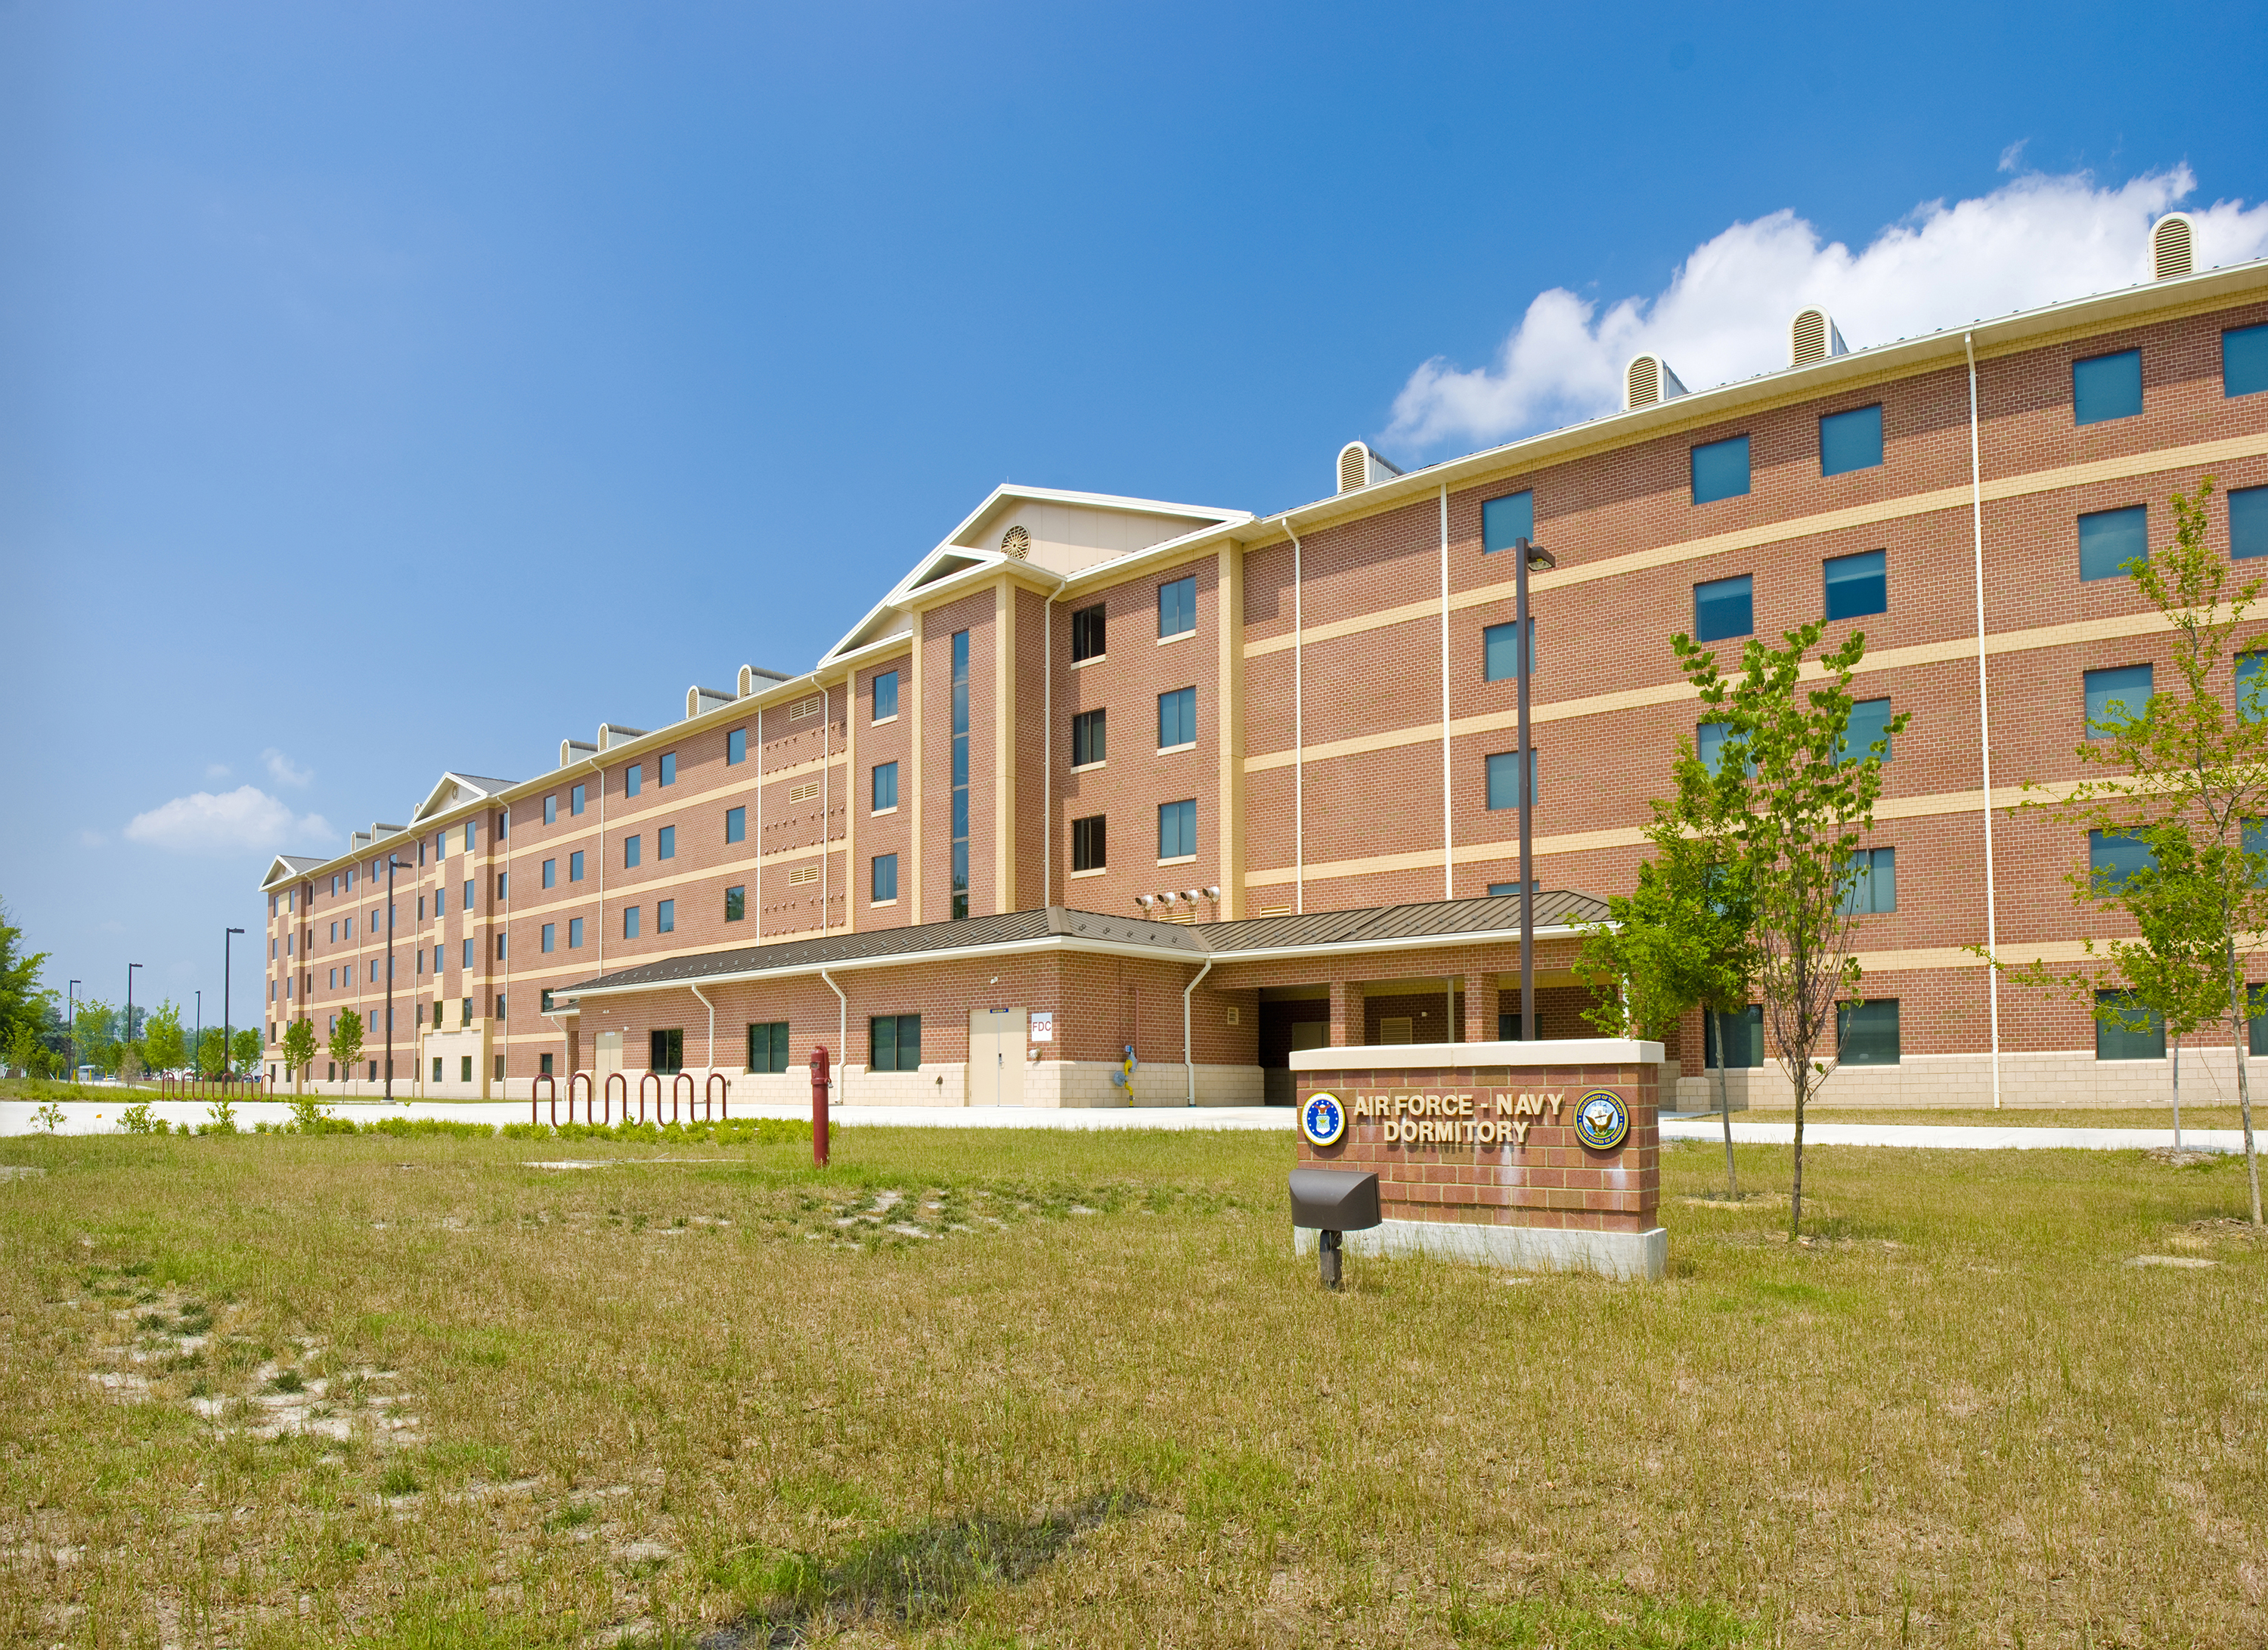  Air  Force  Navy Dormitory Wiley Wilson